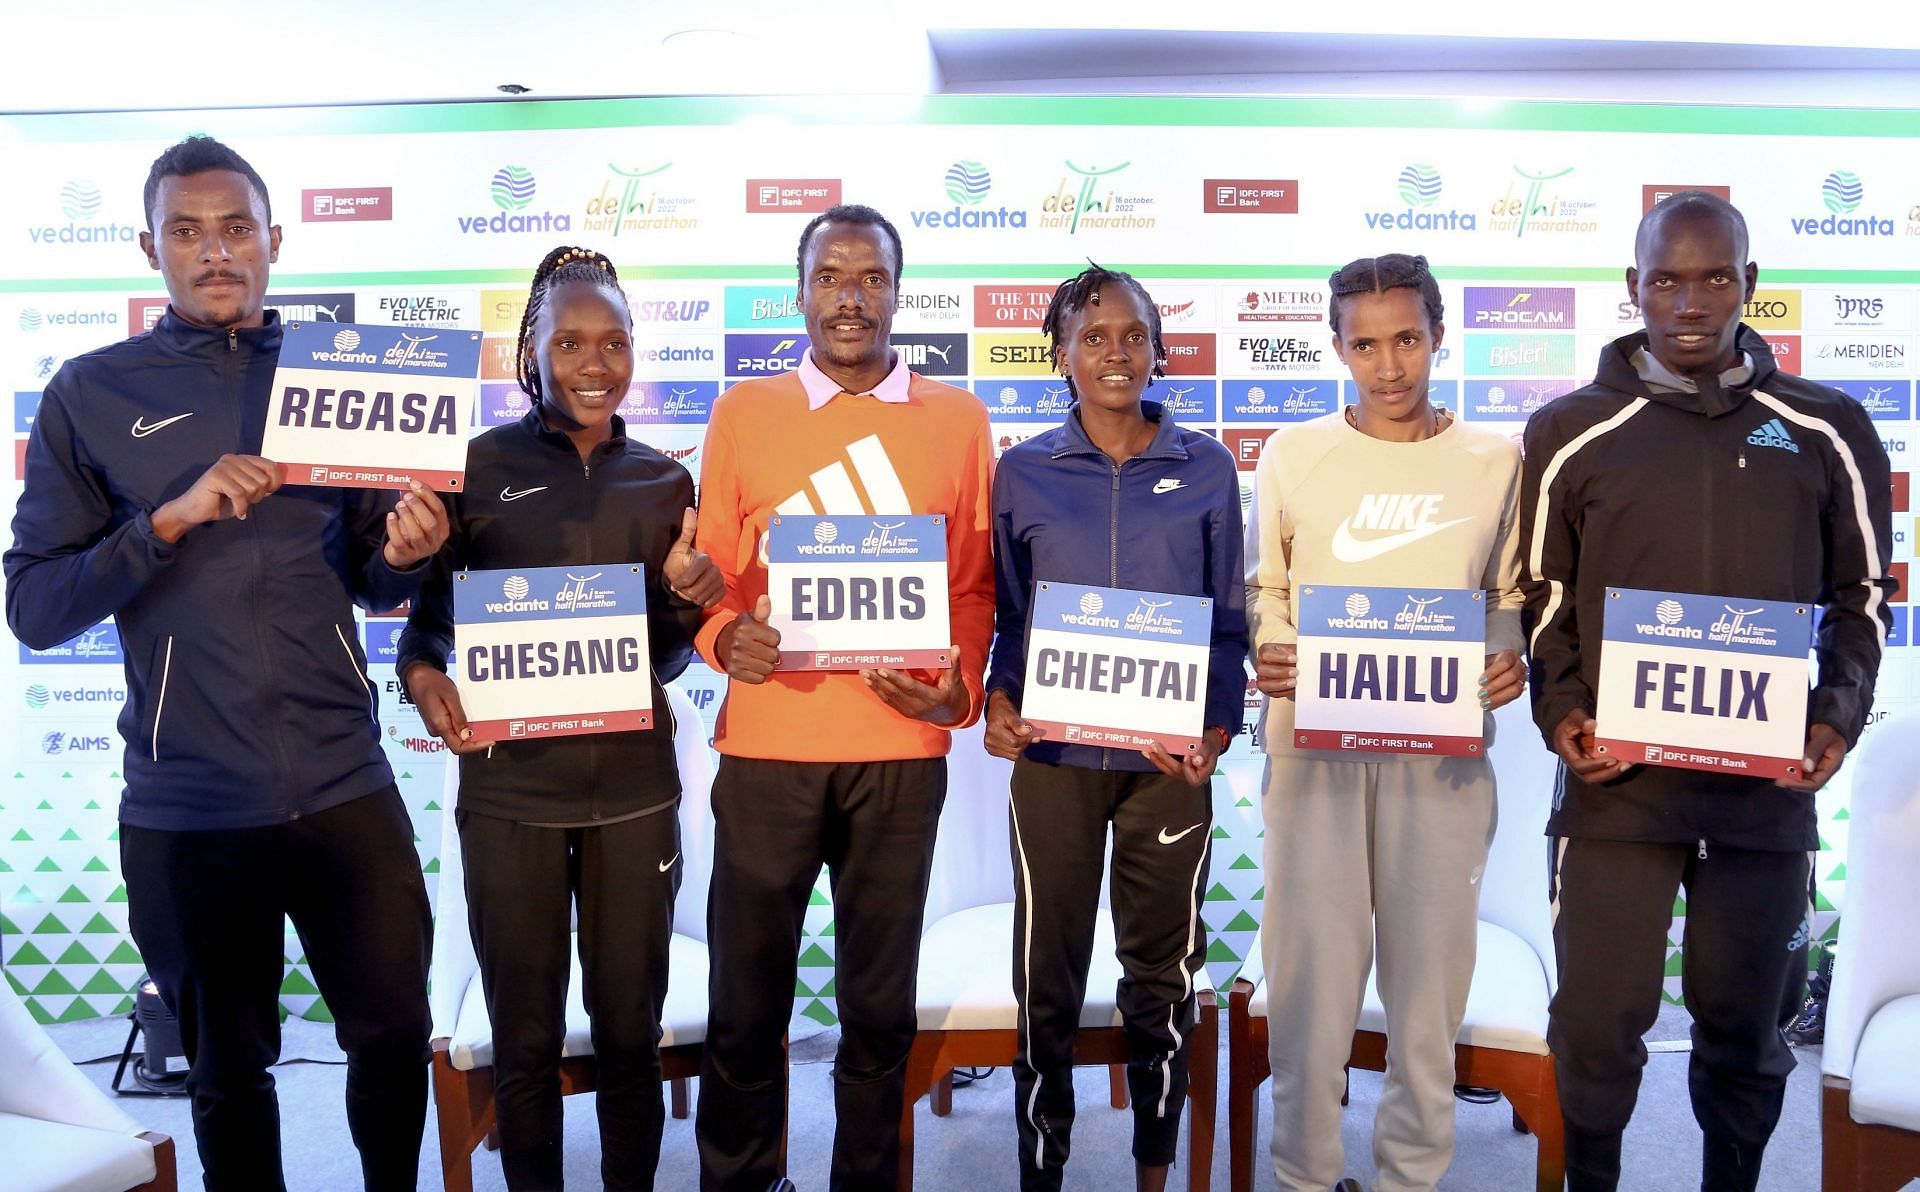 Foreign athletes pose for a picture on Friday in Delhi. The competitors will compete at the Delhi Half Marathon on Sunday. 